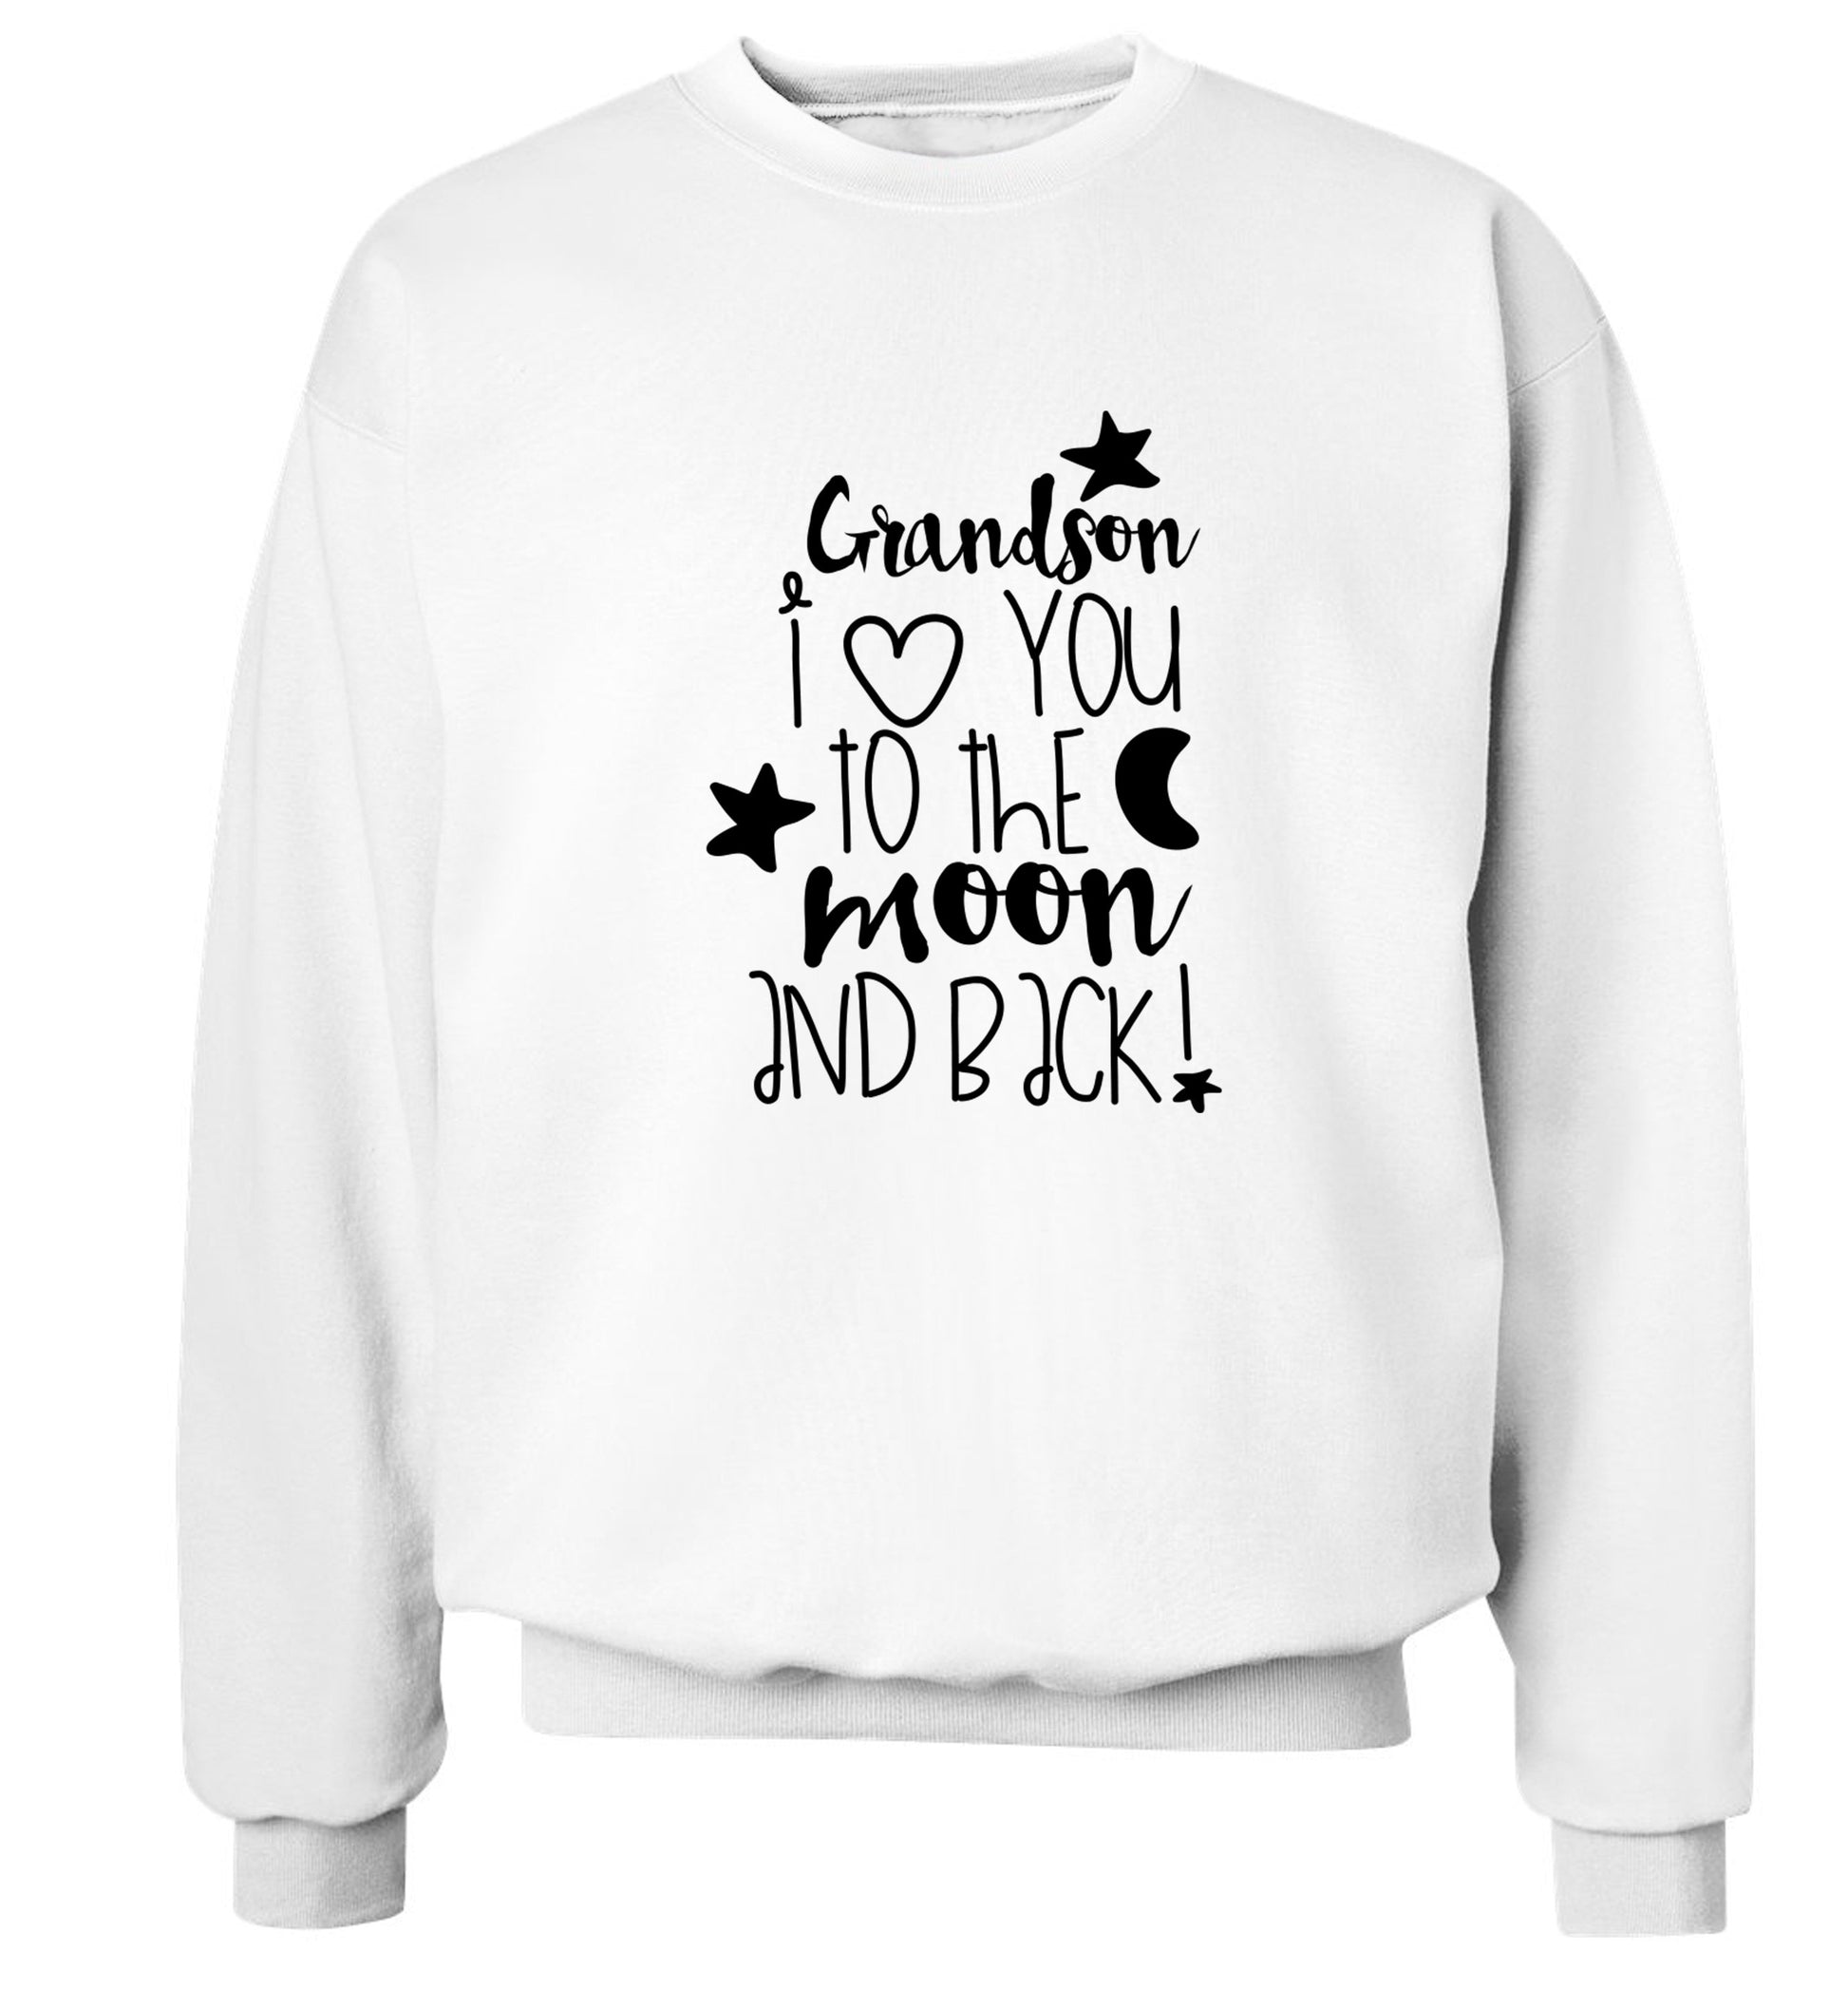 Grandson I love you to the moon and back Adult's unisex white  sweater 2XL